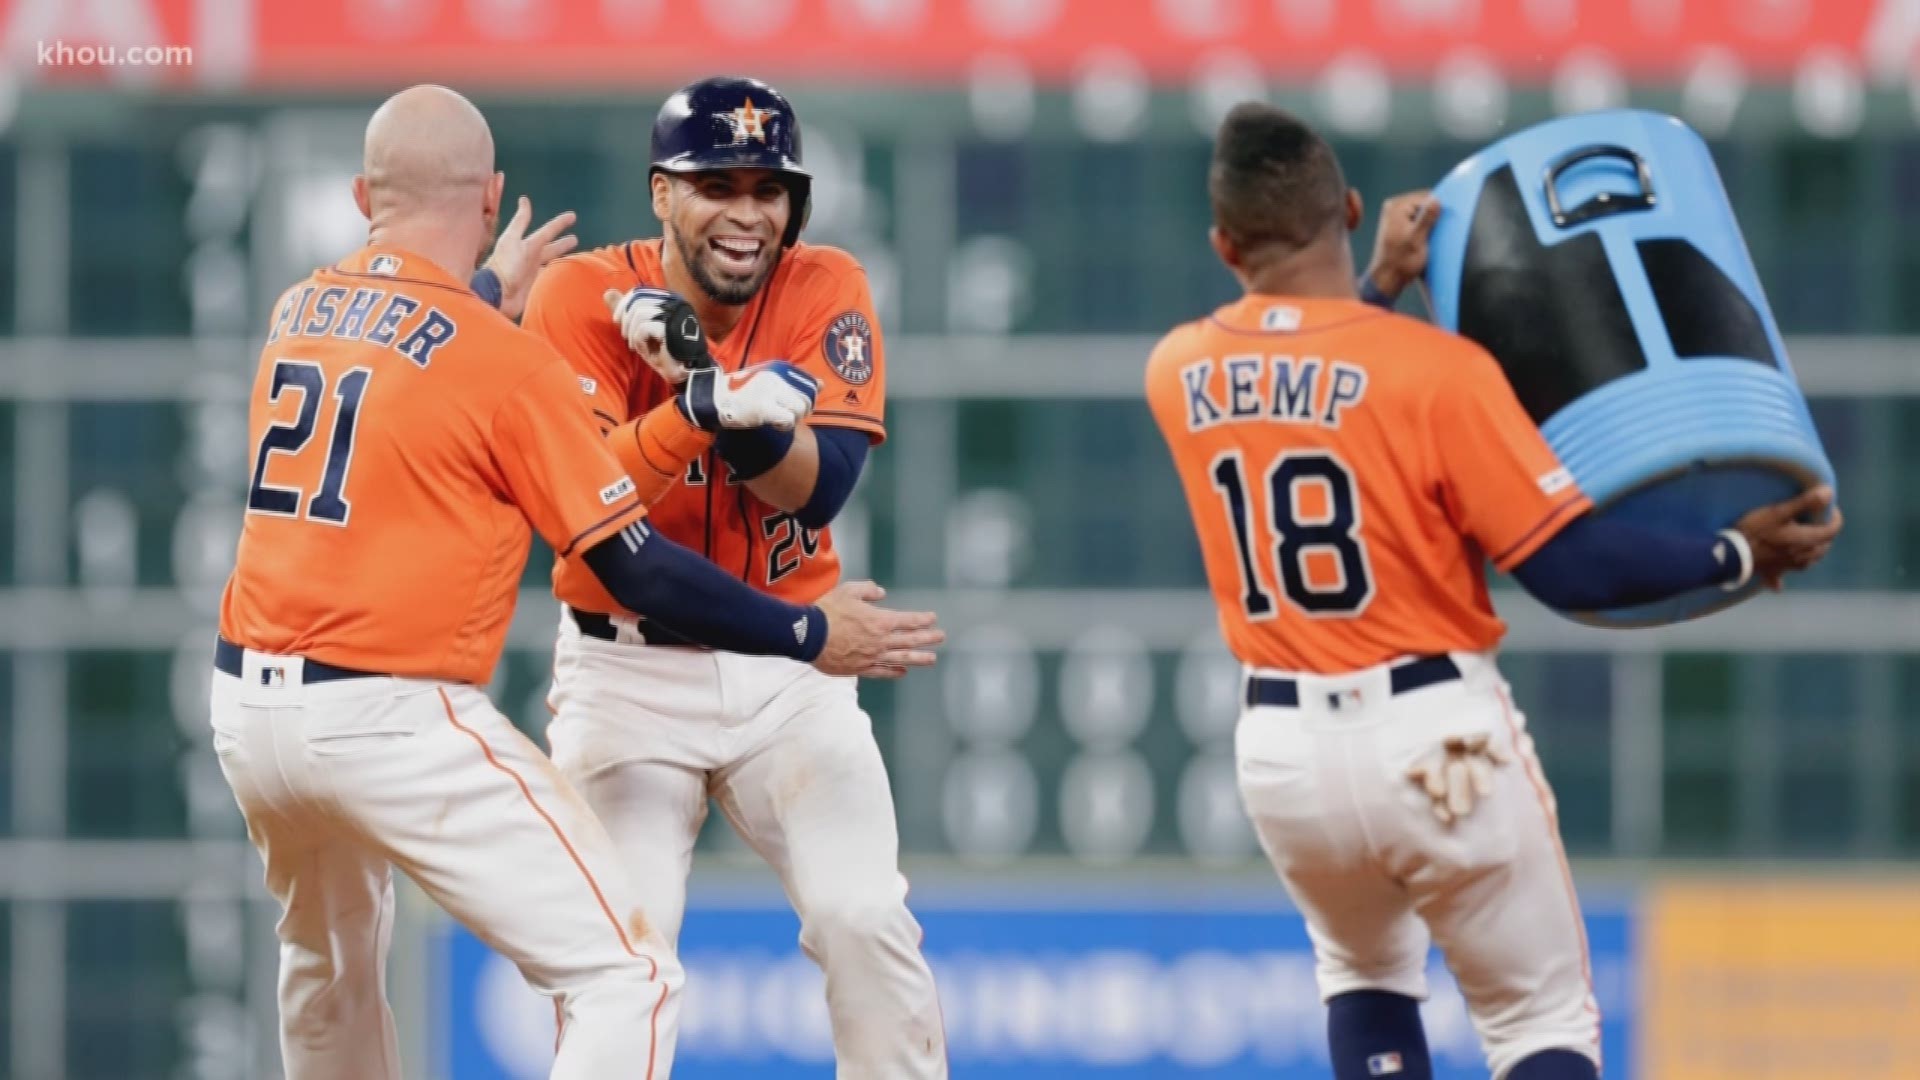 The two best starts in Astros history? 2017 and 2019. Here's how they compare.